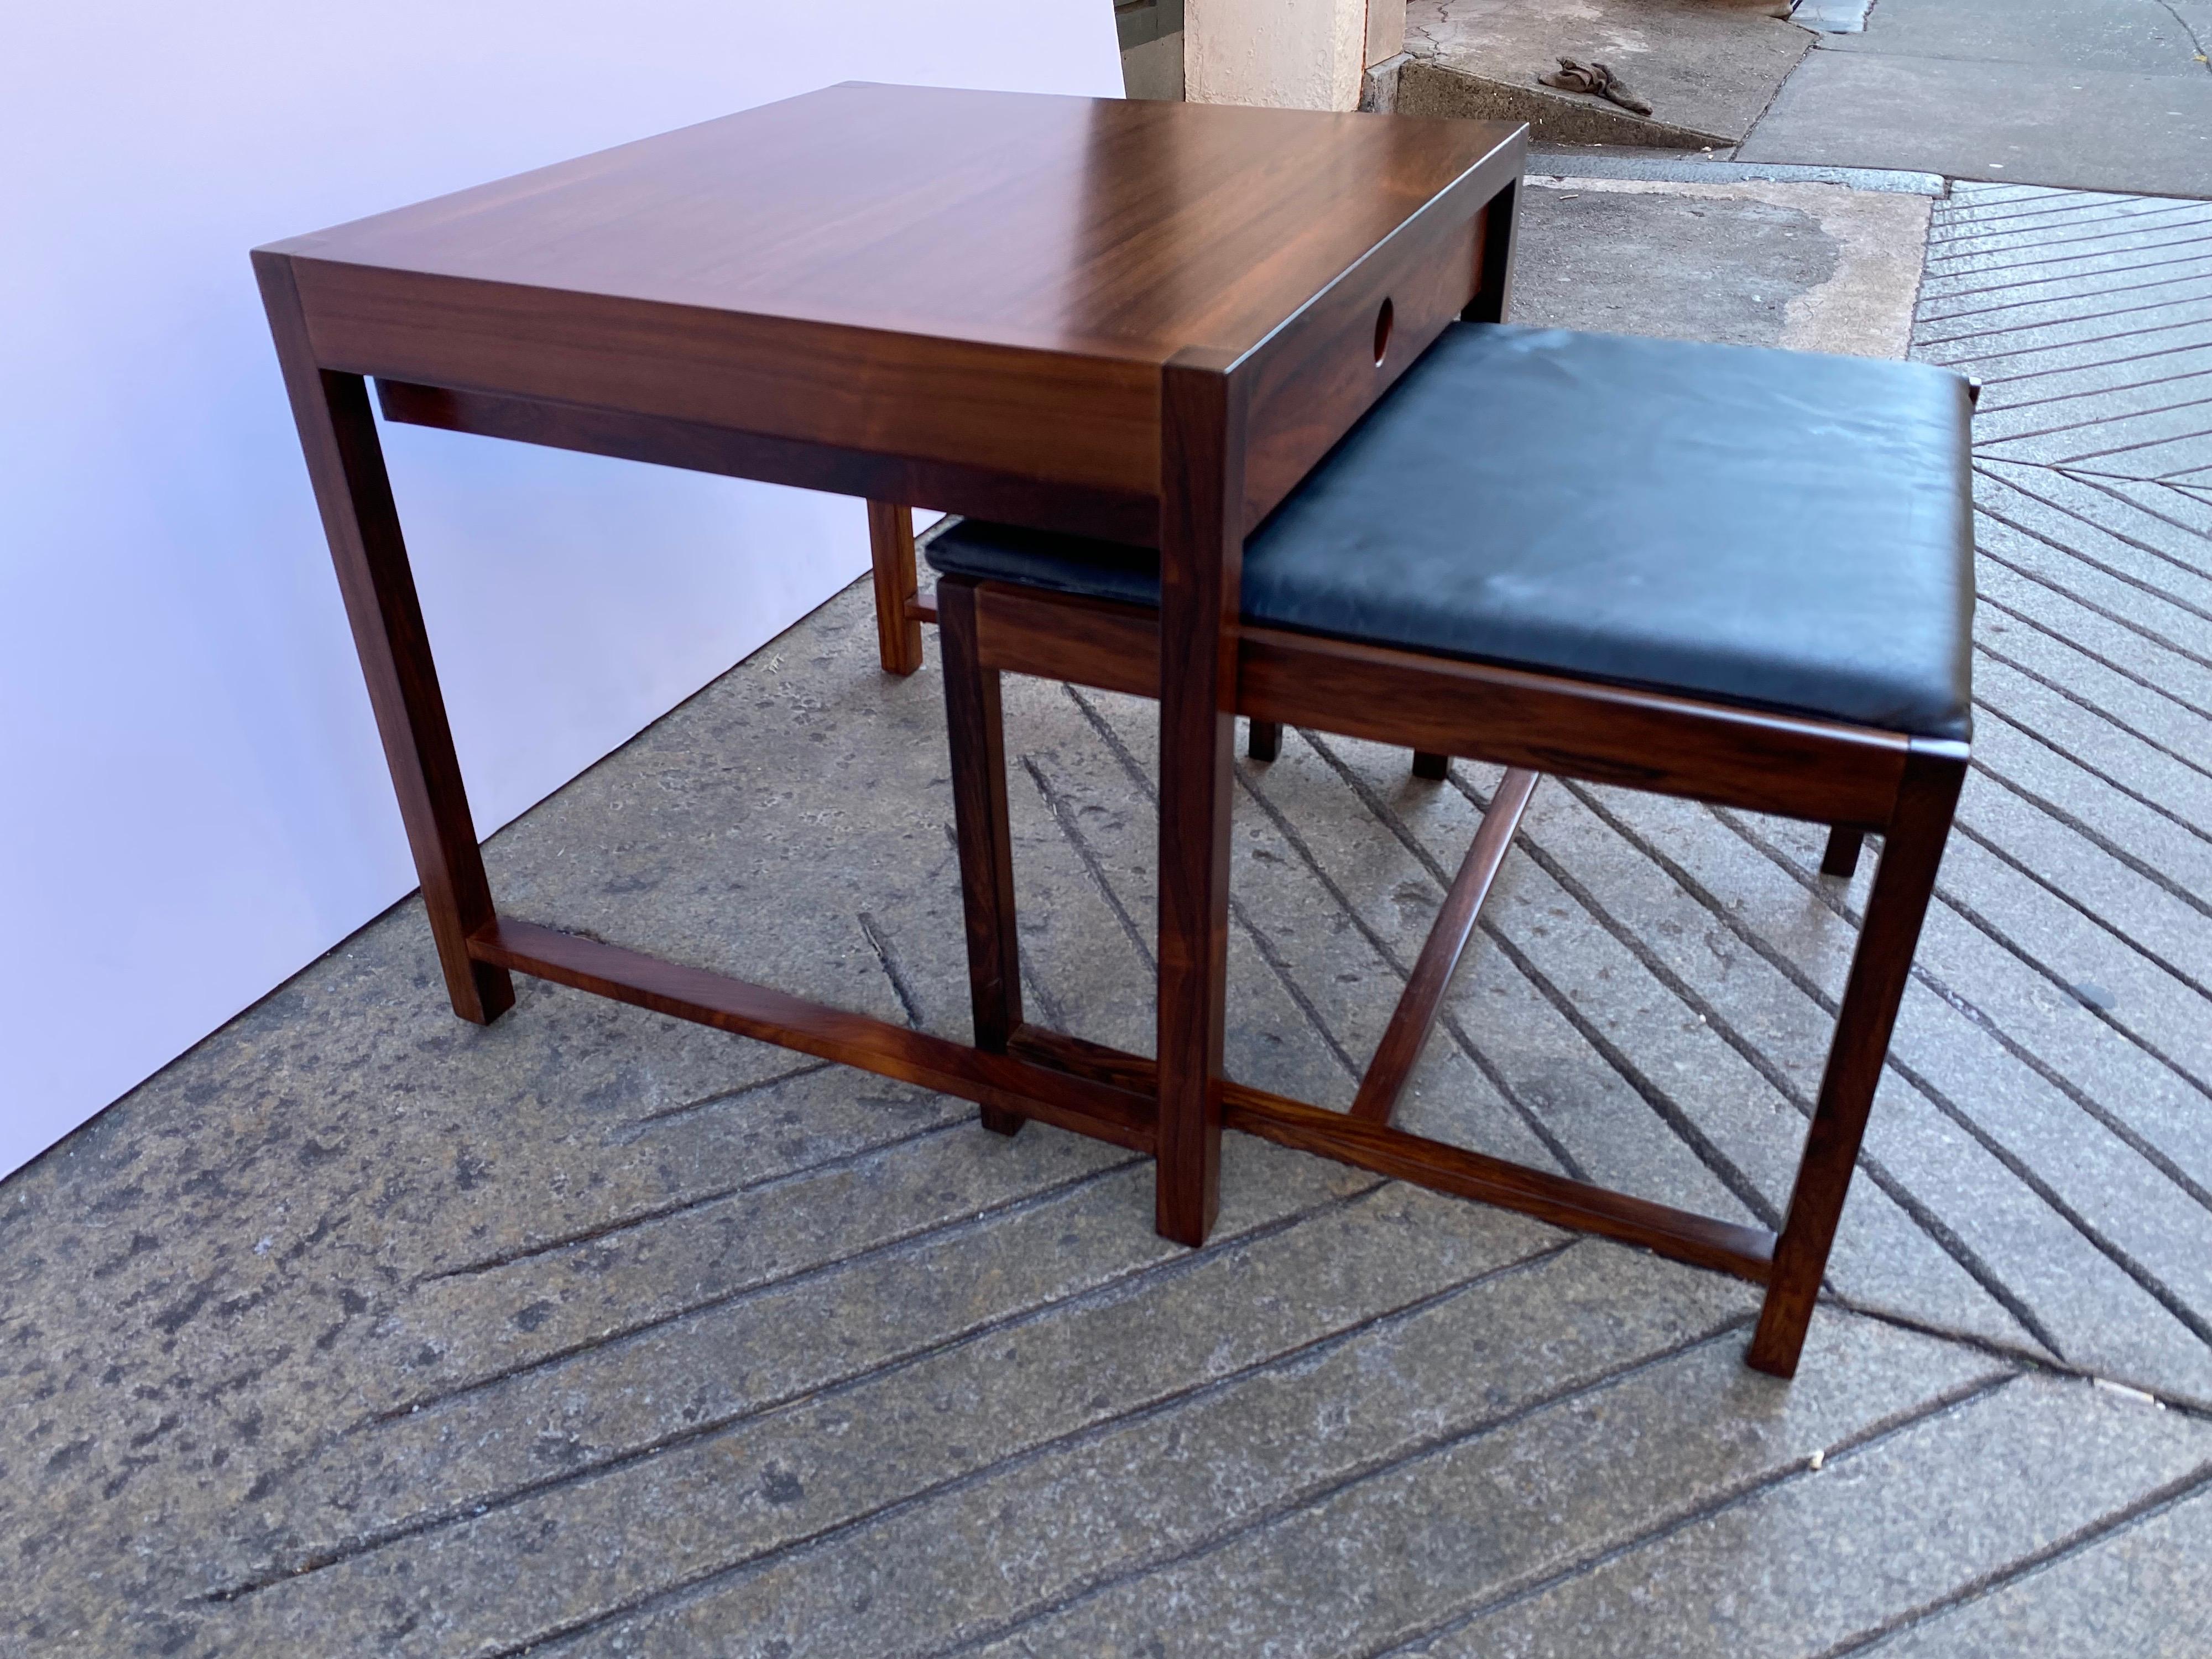 Brode Blindheim for Sykklyven rosewood end table and nesting ottoman. Beautiful and useful! Table with one pull out drawer that has been beautifully refinished. Nesting Ottoman fits easily under the Table. Ottoman measures 21 x19 and is 15